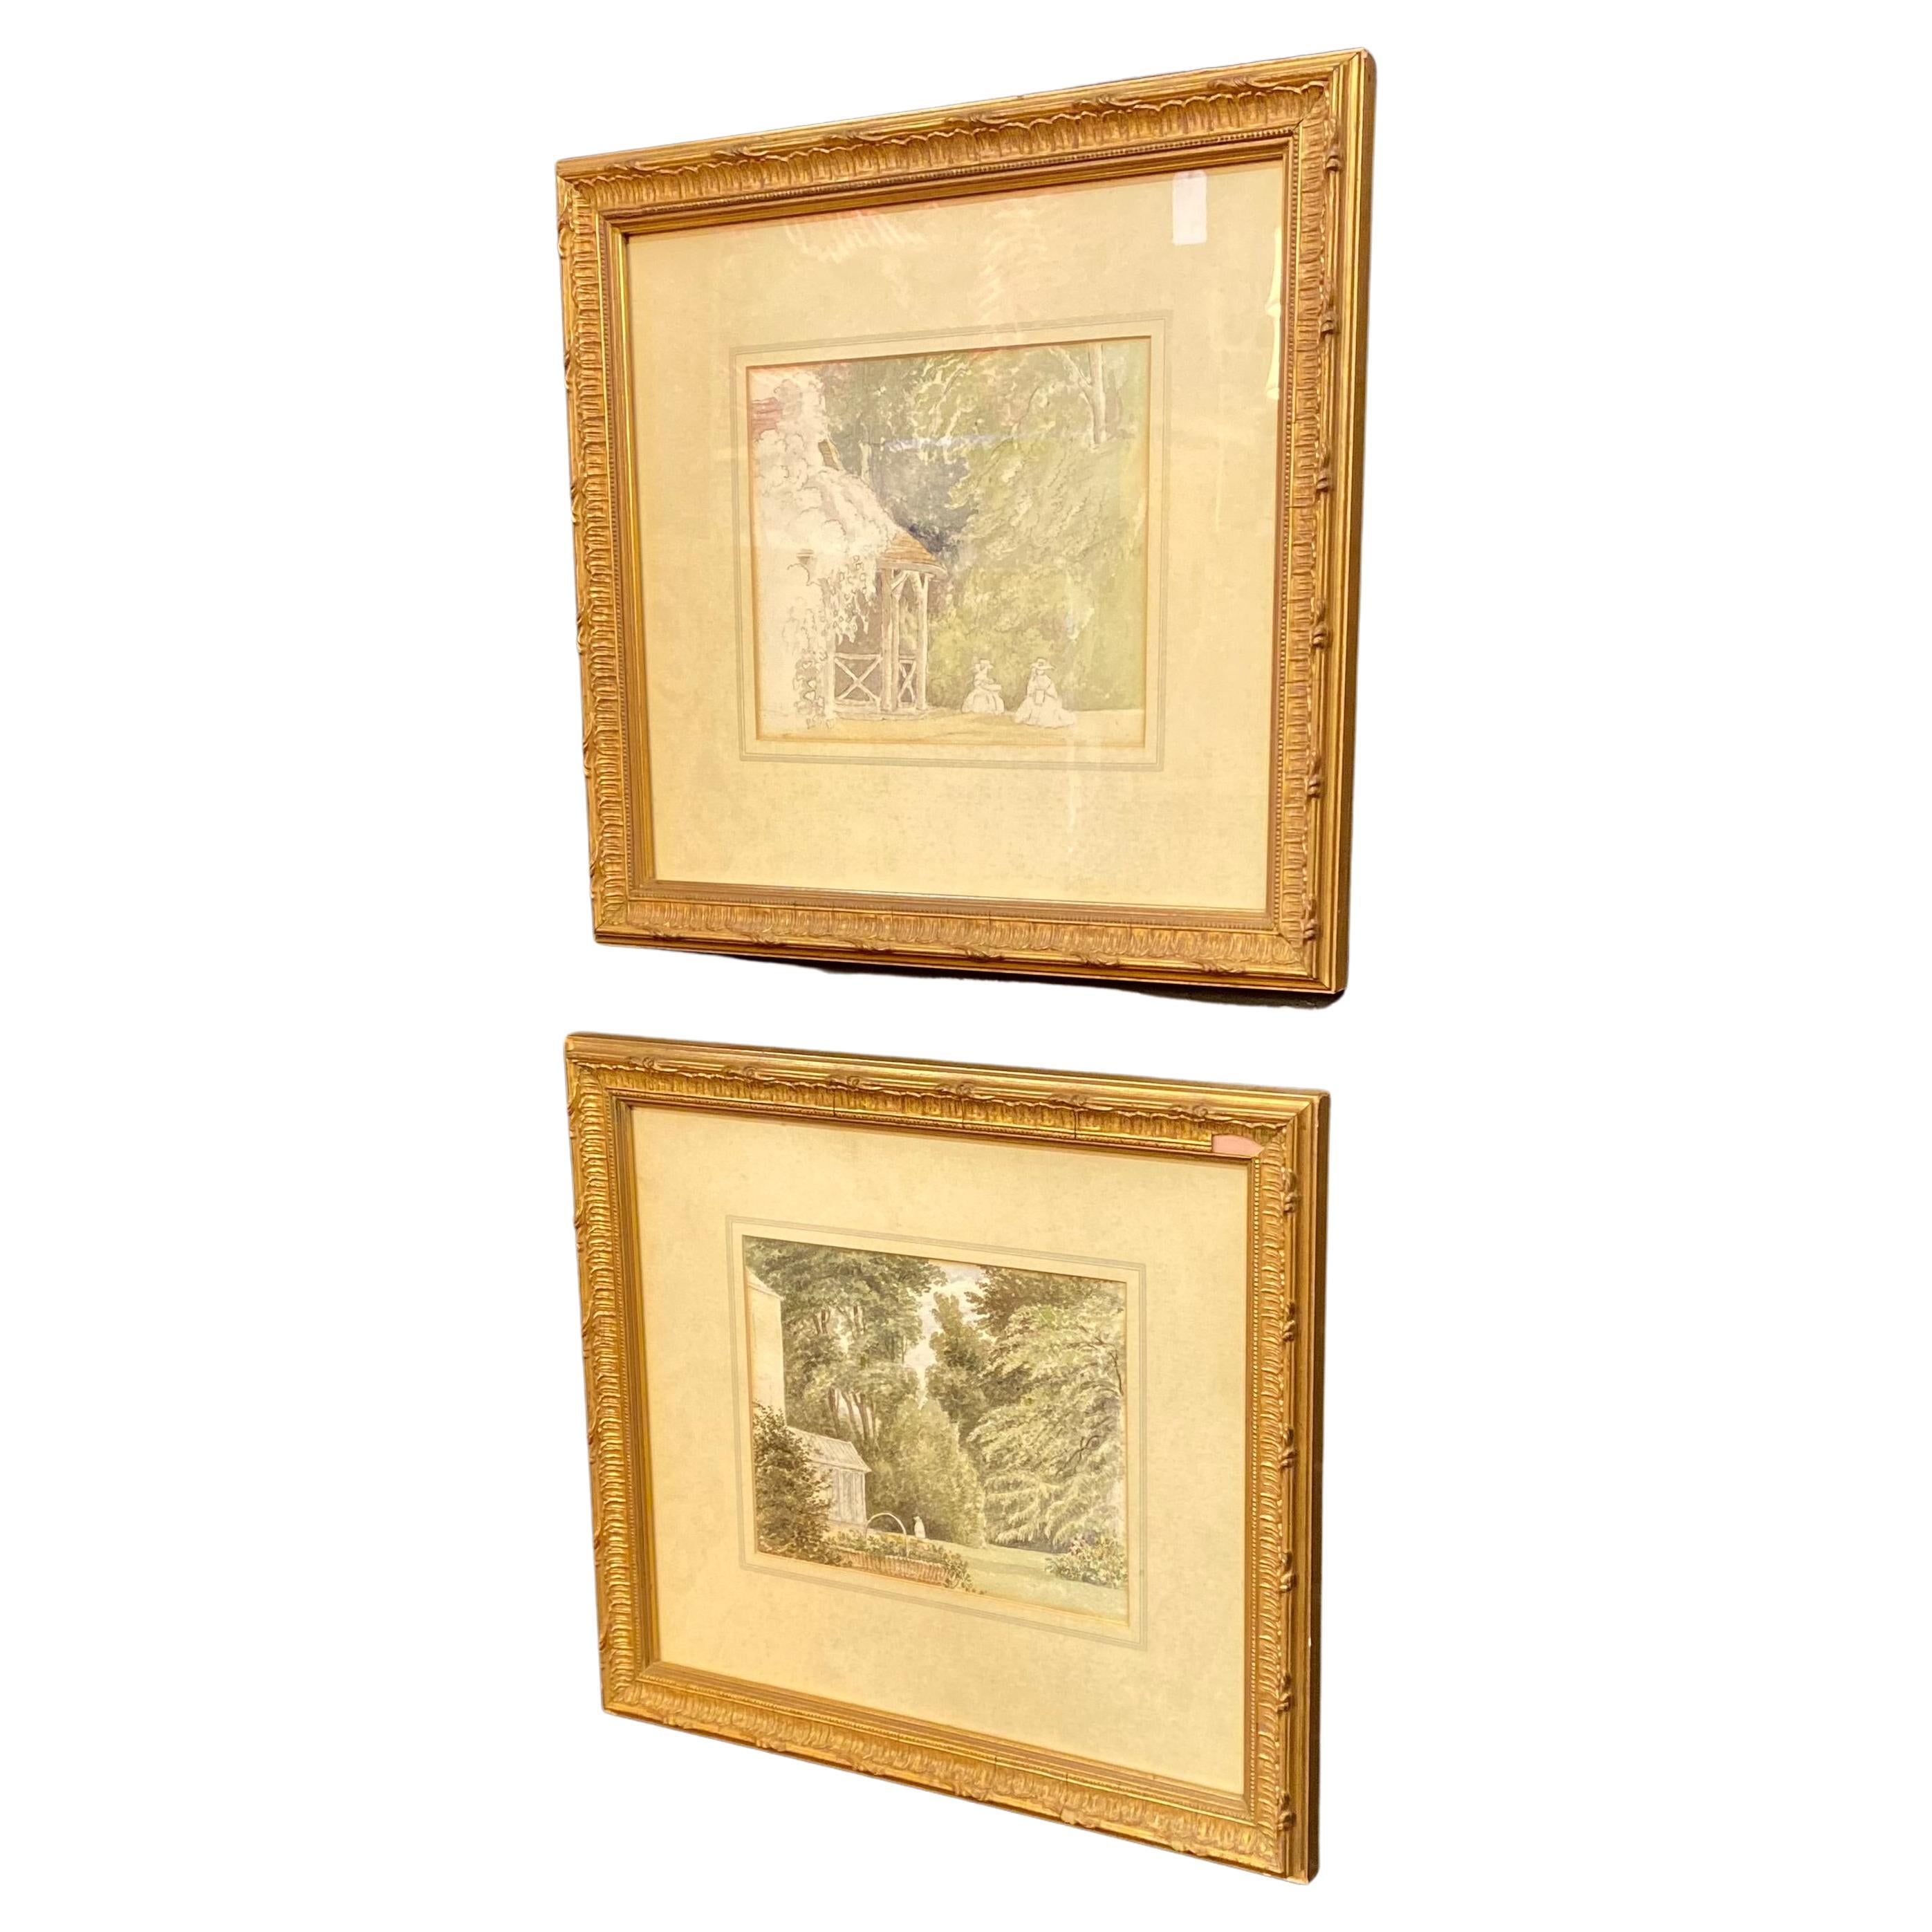 Two original English watercolor/drawings circa 1854,1855,  Ellen Dumbleton, from her sketchbook, Humble House and Summer house, Hall Grove. Beautifully presented in gilt gesso and wood frames. Ellen Dumbleton was an accomplished and prolific artist